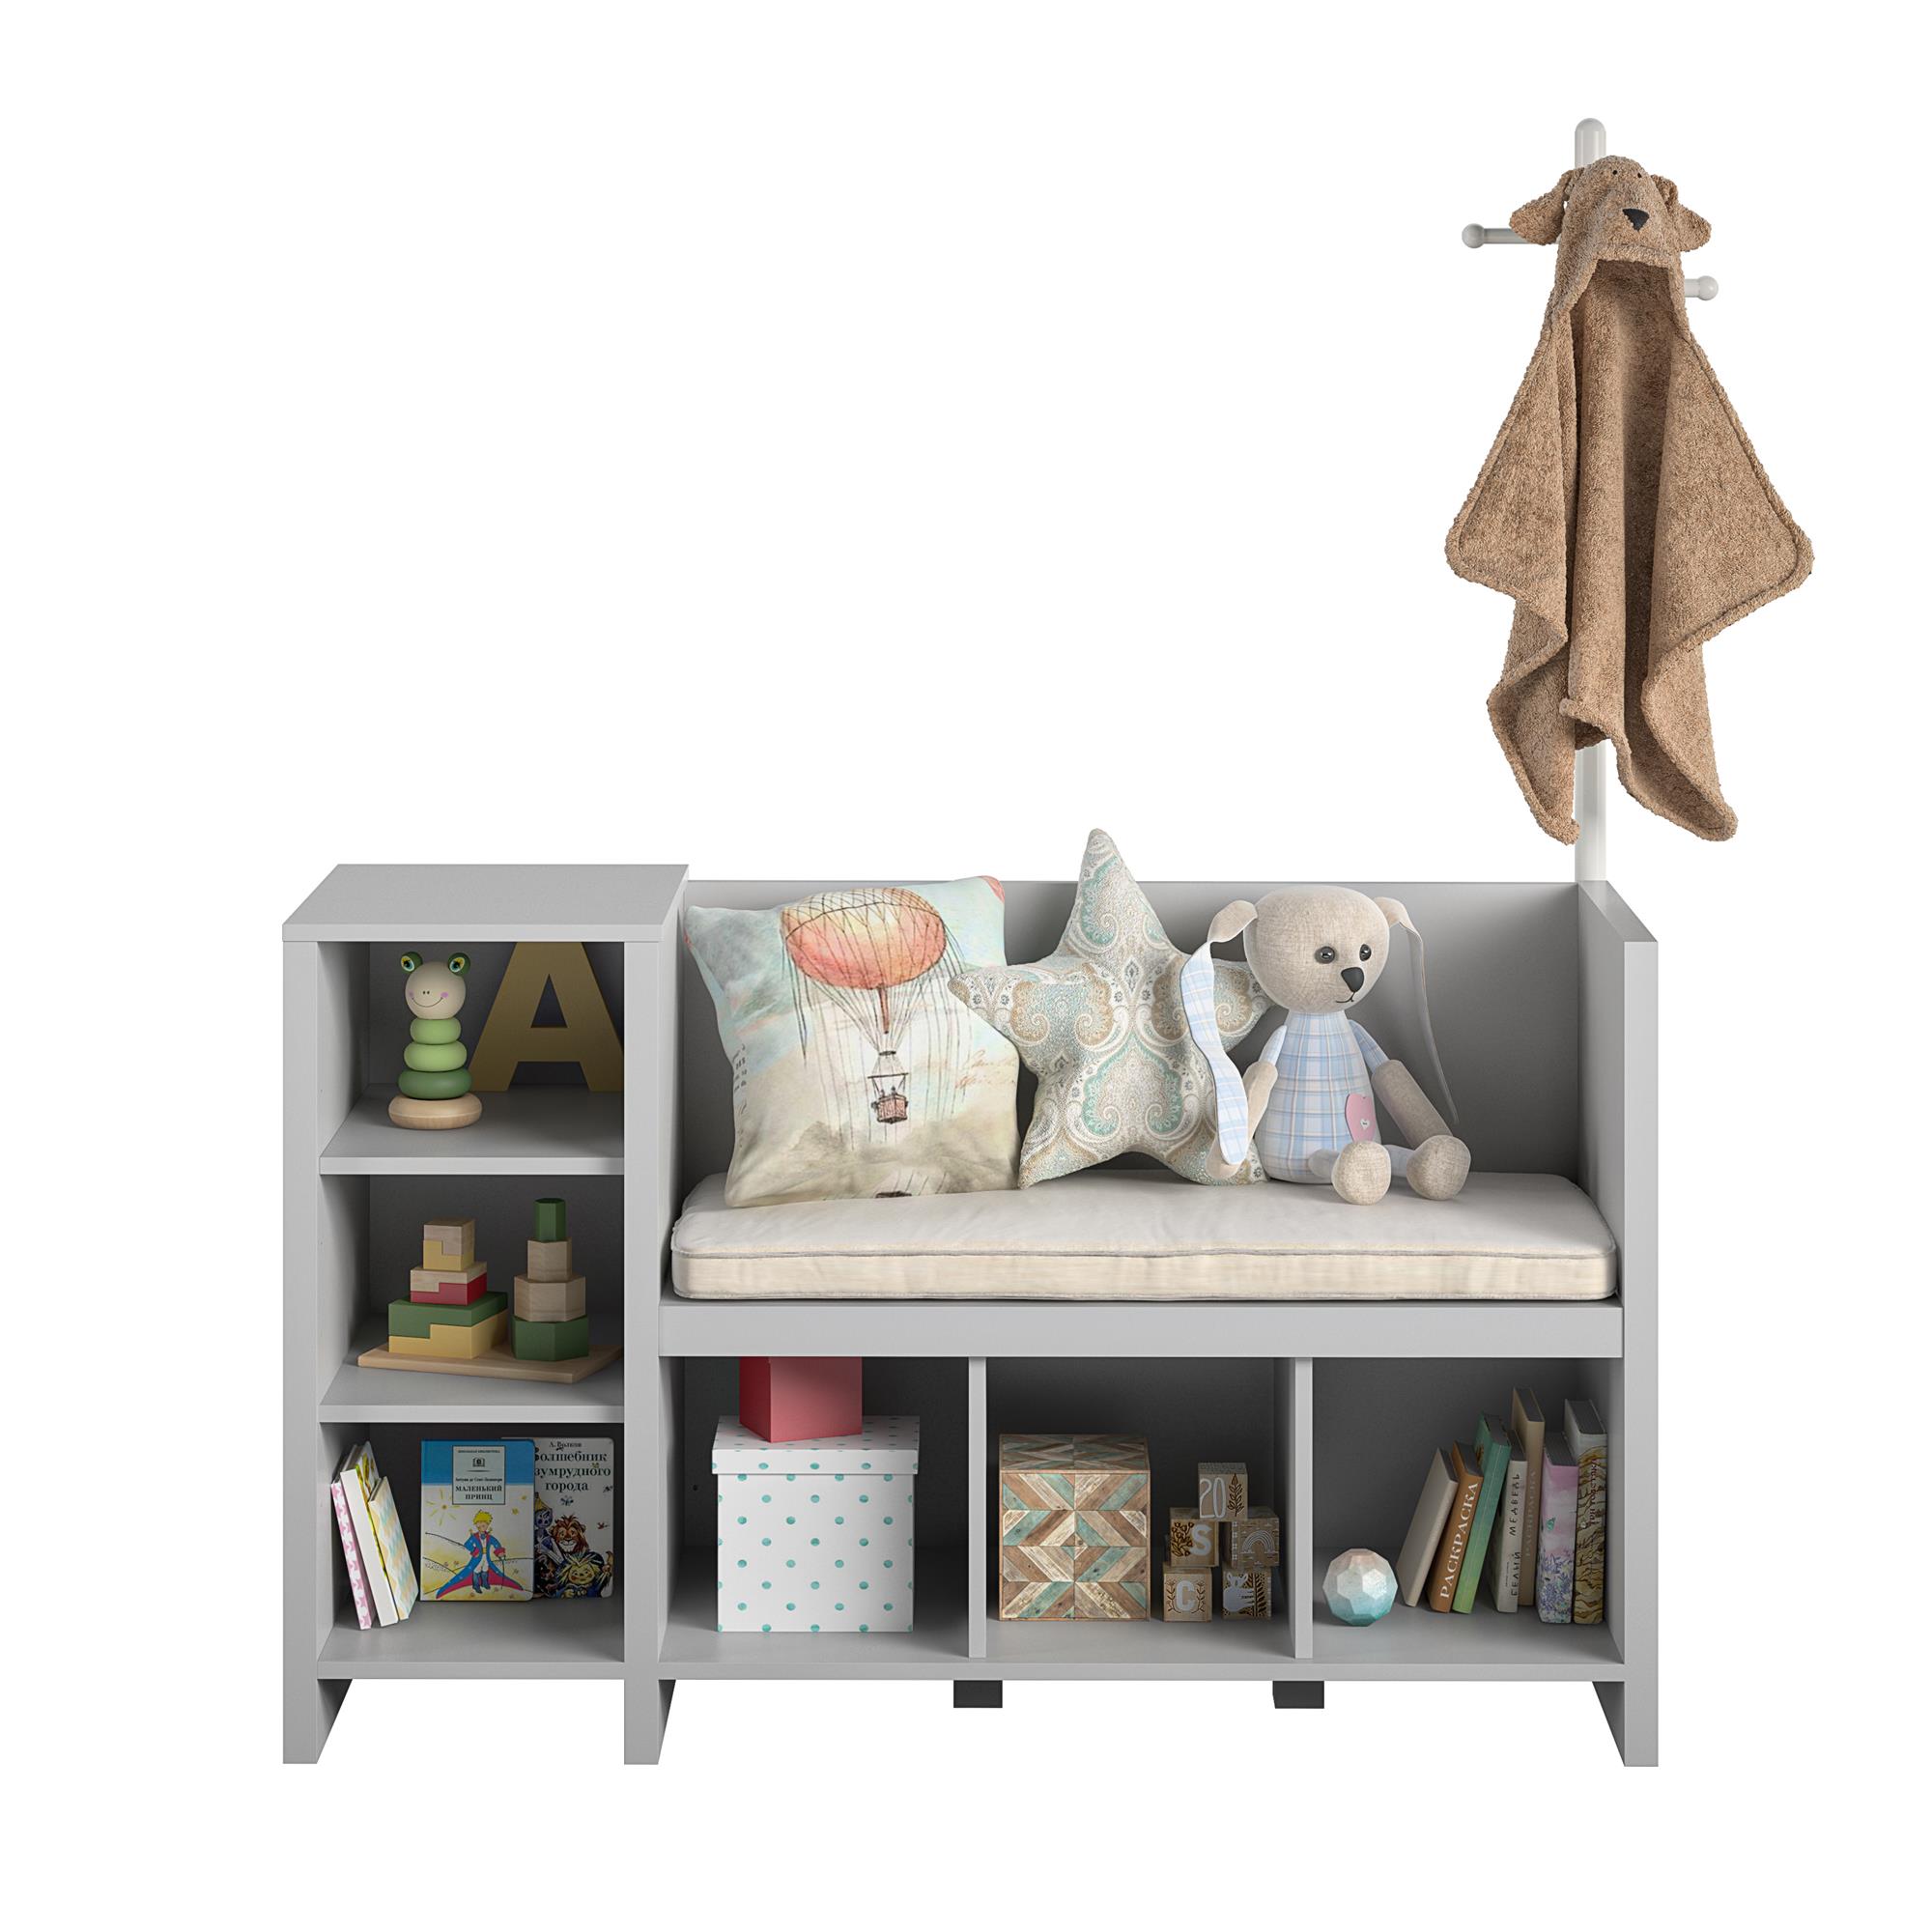 Ameriwood Home Charli Storage Bench and Coat Rack, Dove Gray - image 3 of 12